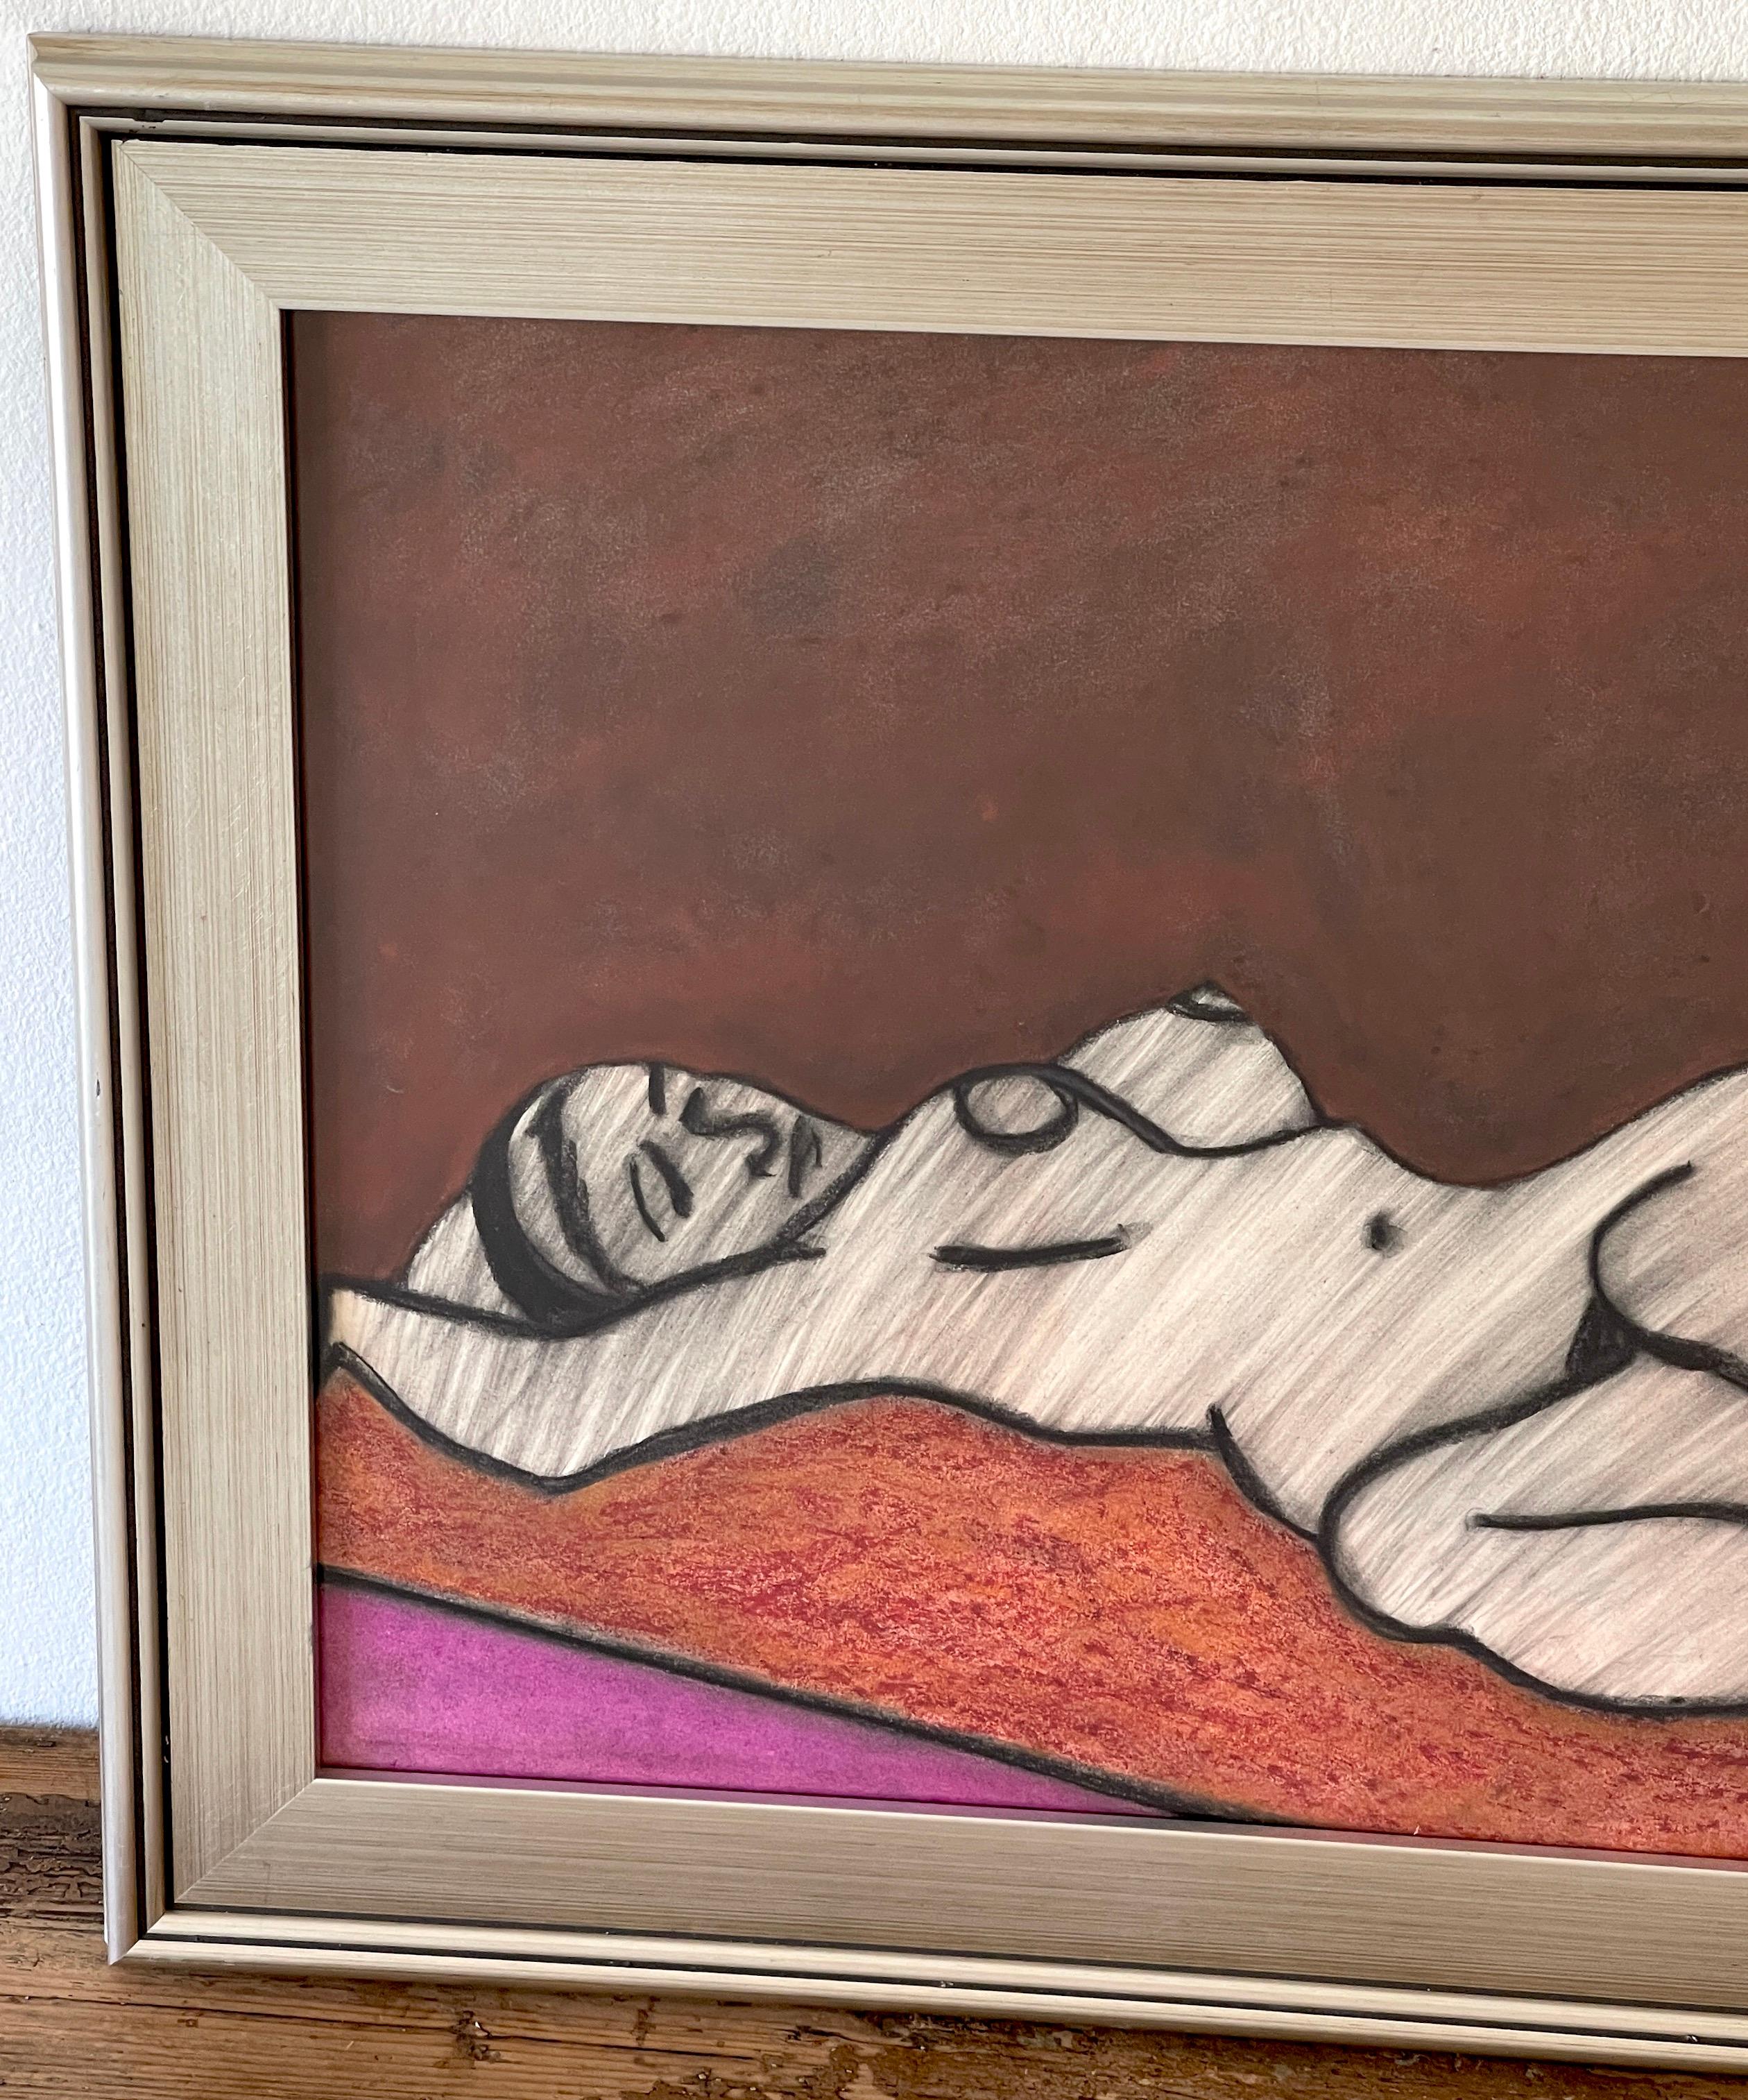 Modern 'Odalisque' Oil/Mixed Media on Paper, 1960s by Douglas D. Peden  For Sale